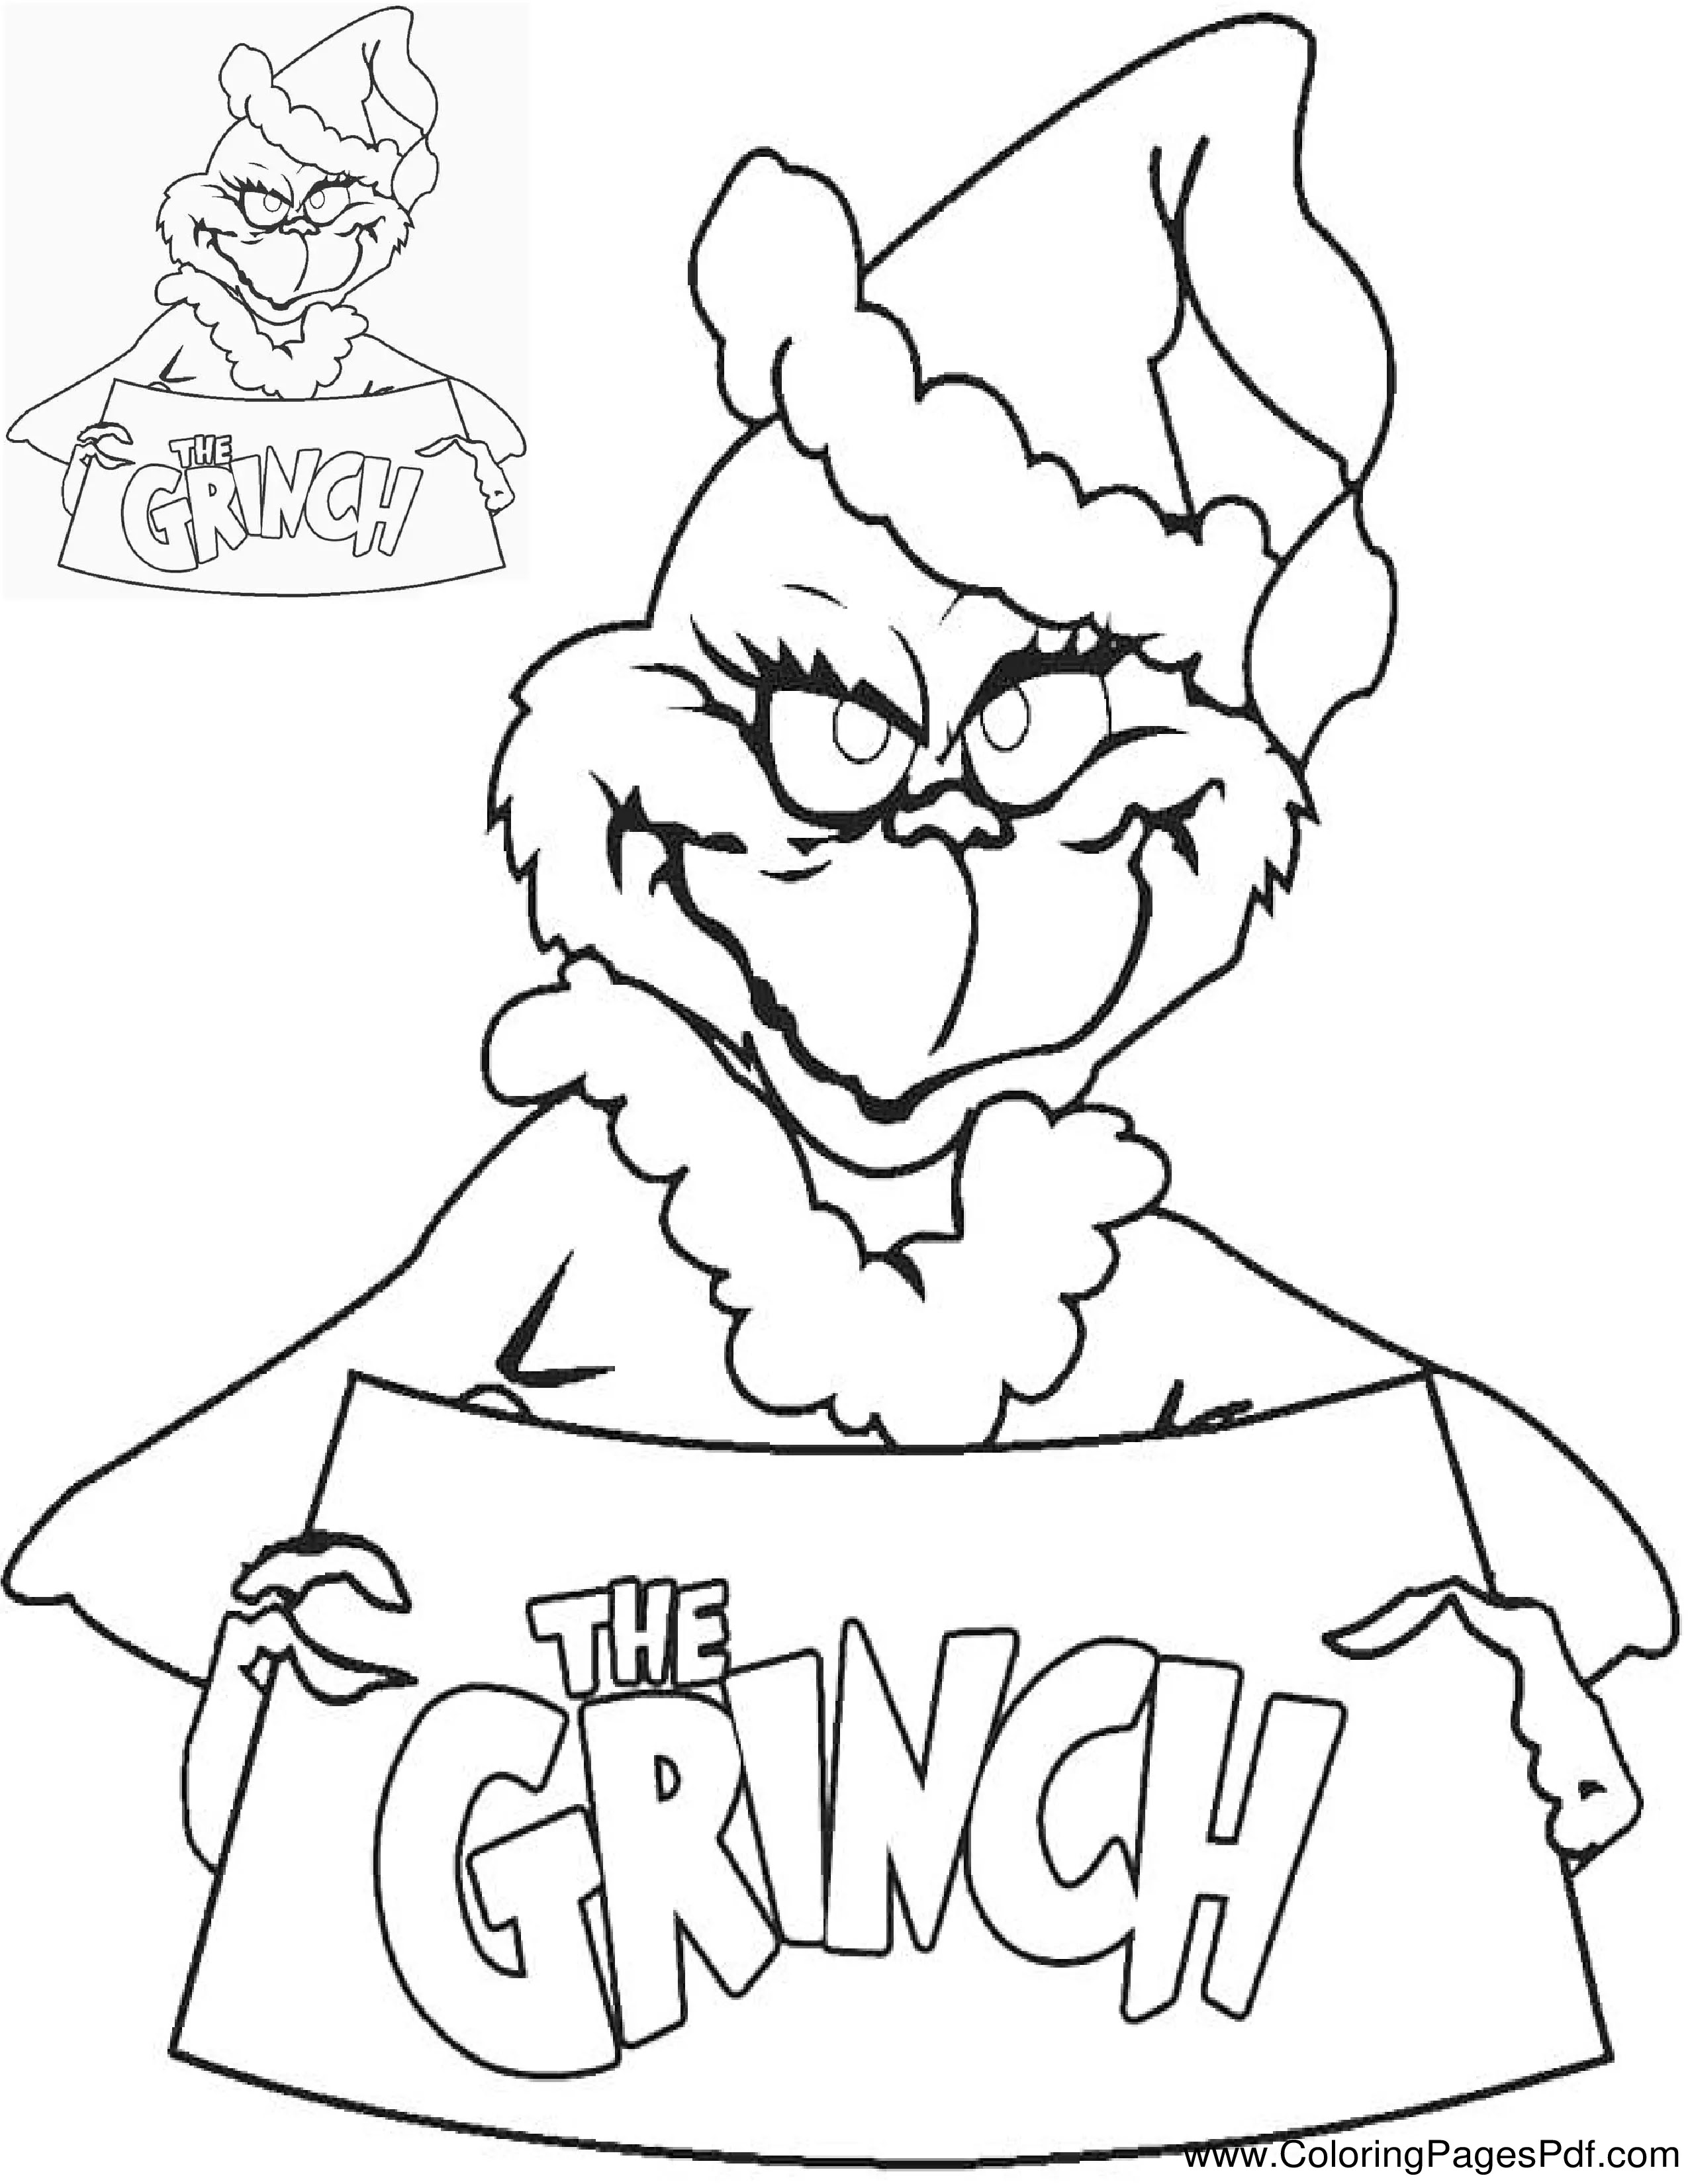 Free Grinch Coloring Pages For Kids